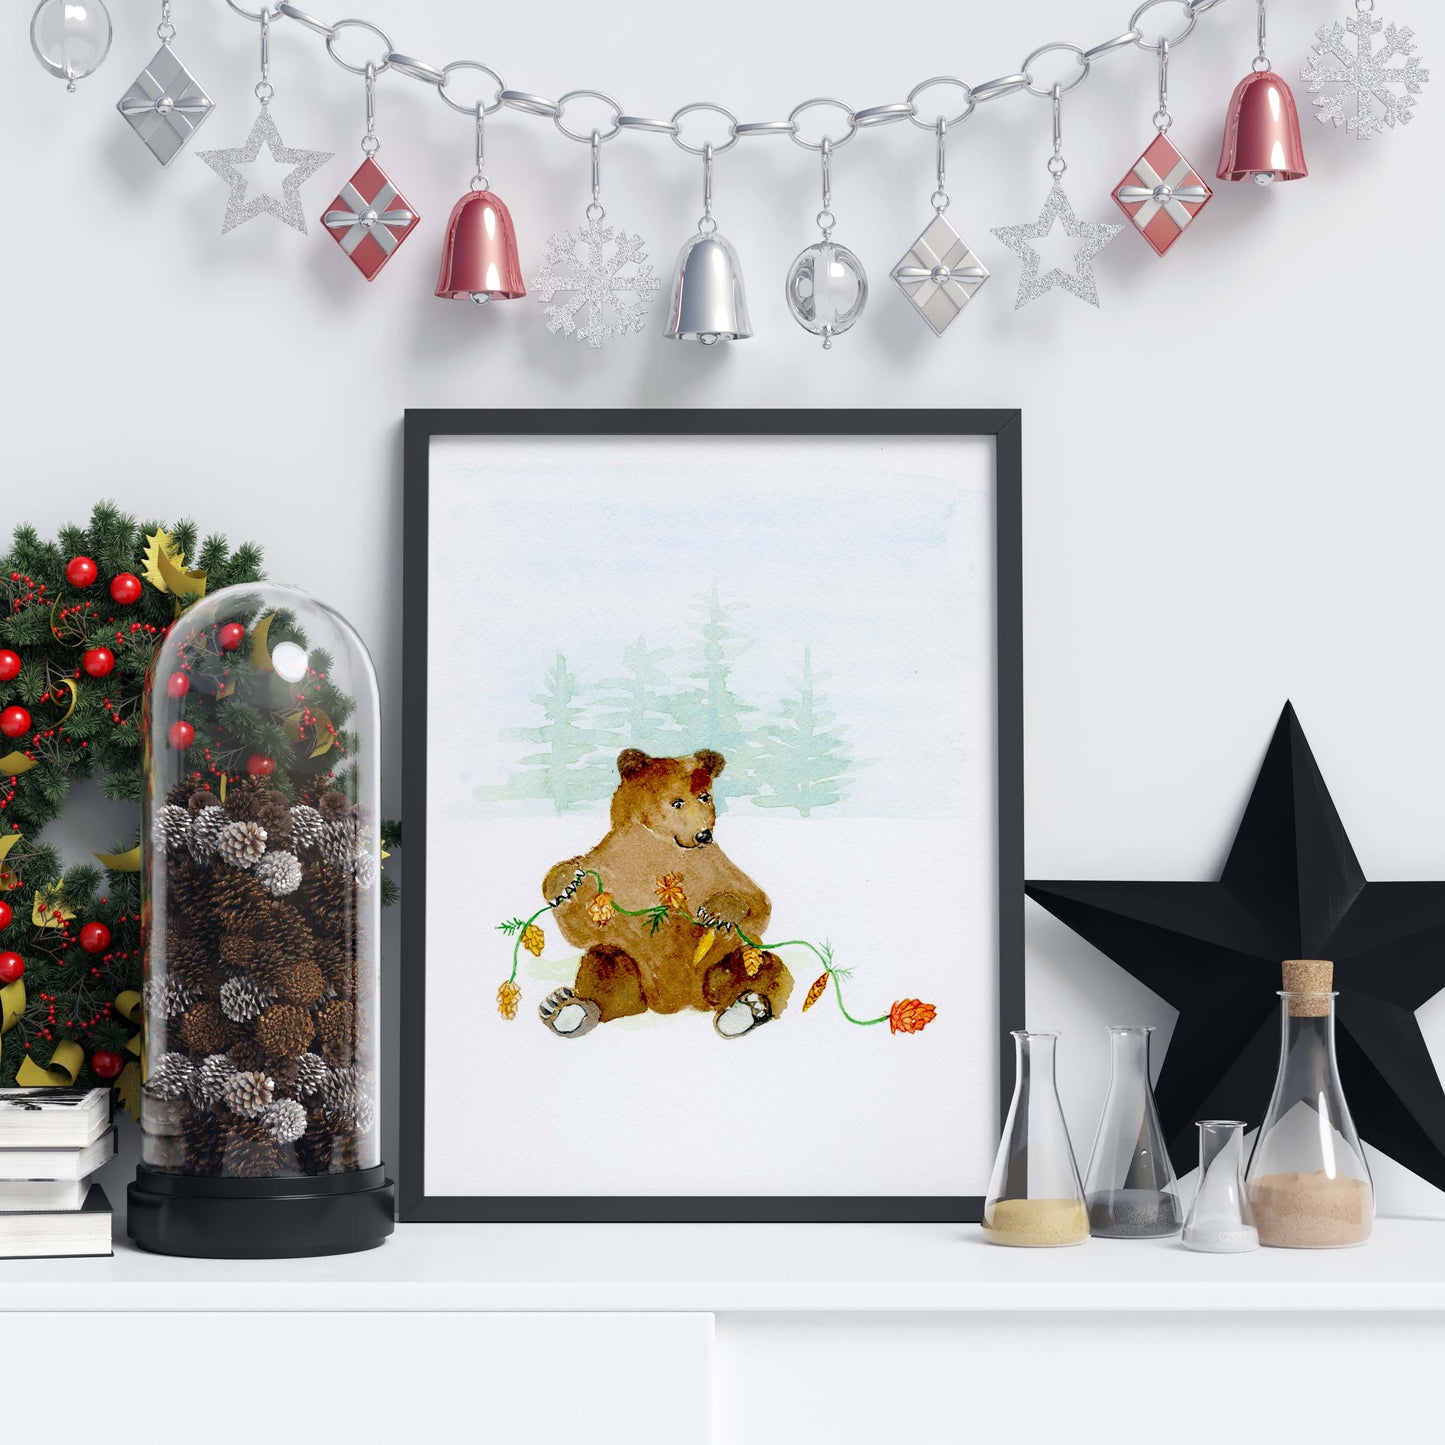 Wall Art Print of Cute Bear with Pinecones - Flamingo Shores - Original Art for Home Decor and Gifts